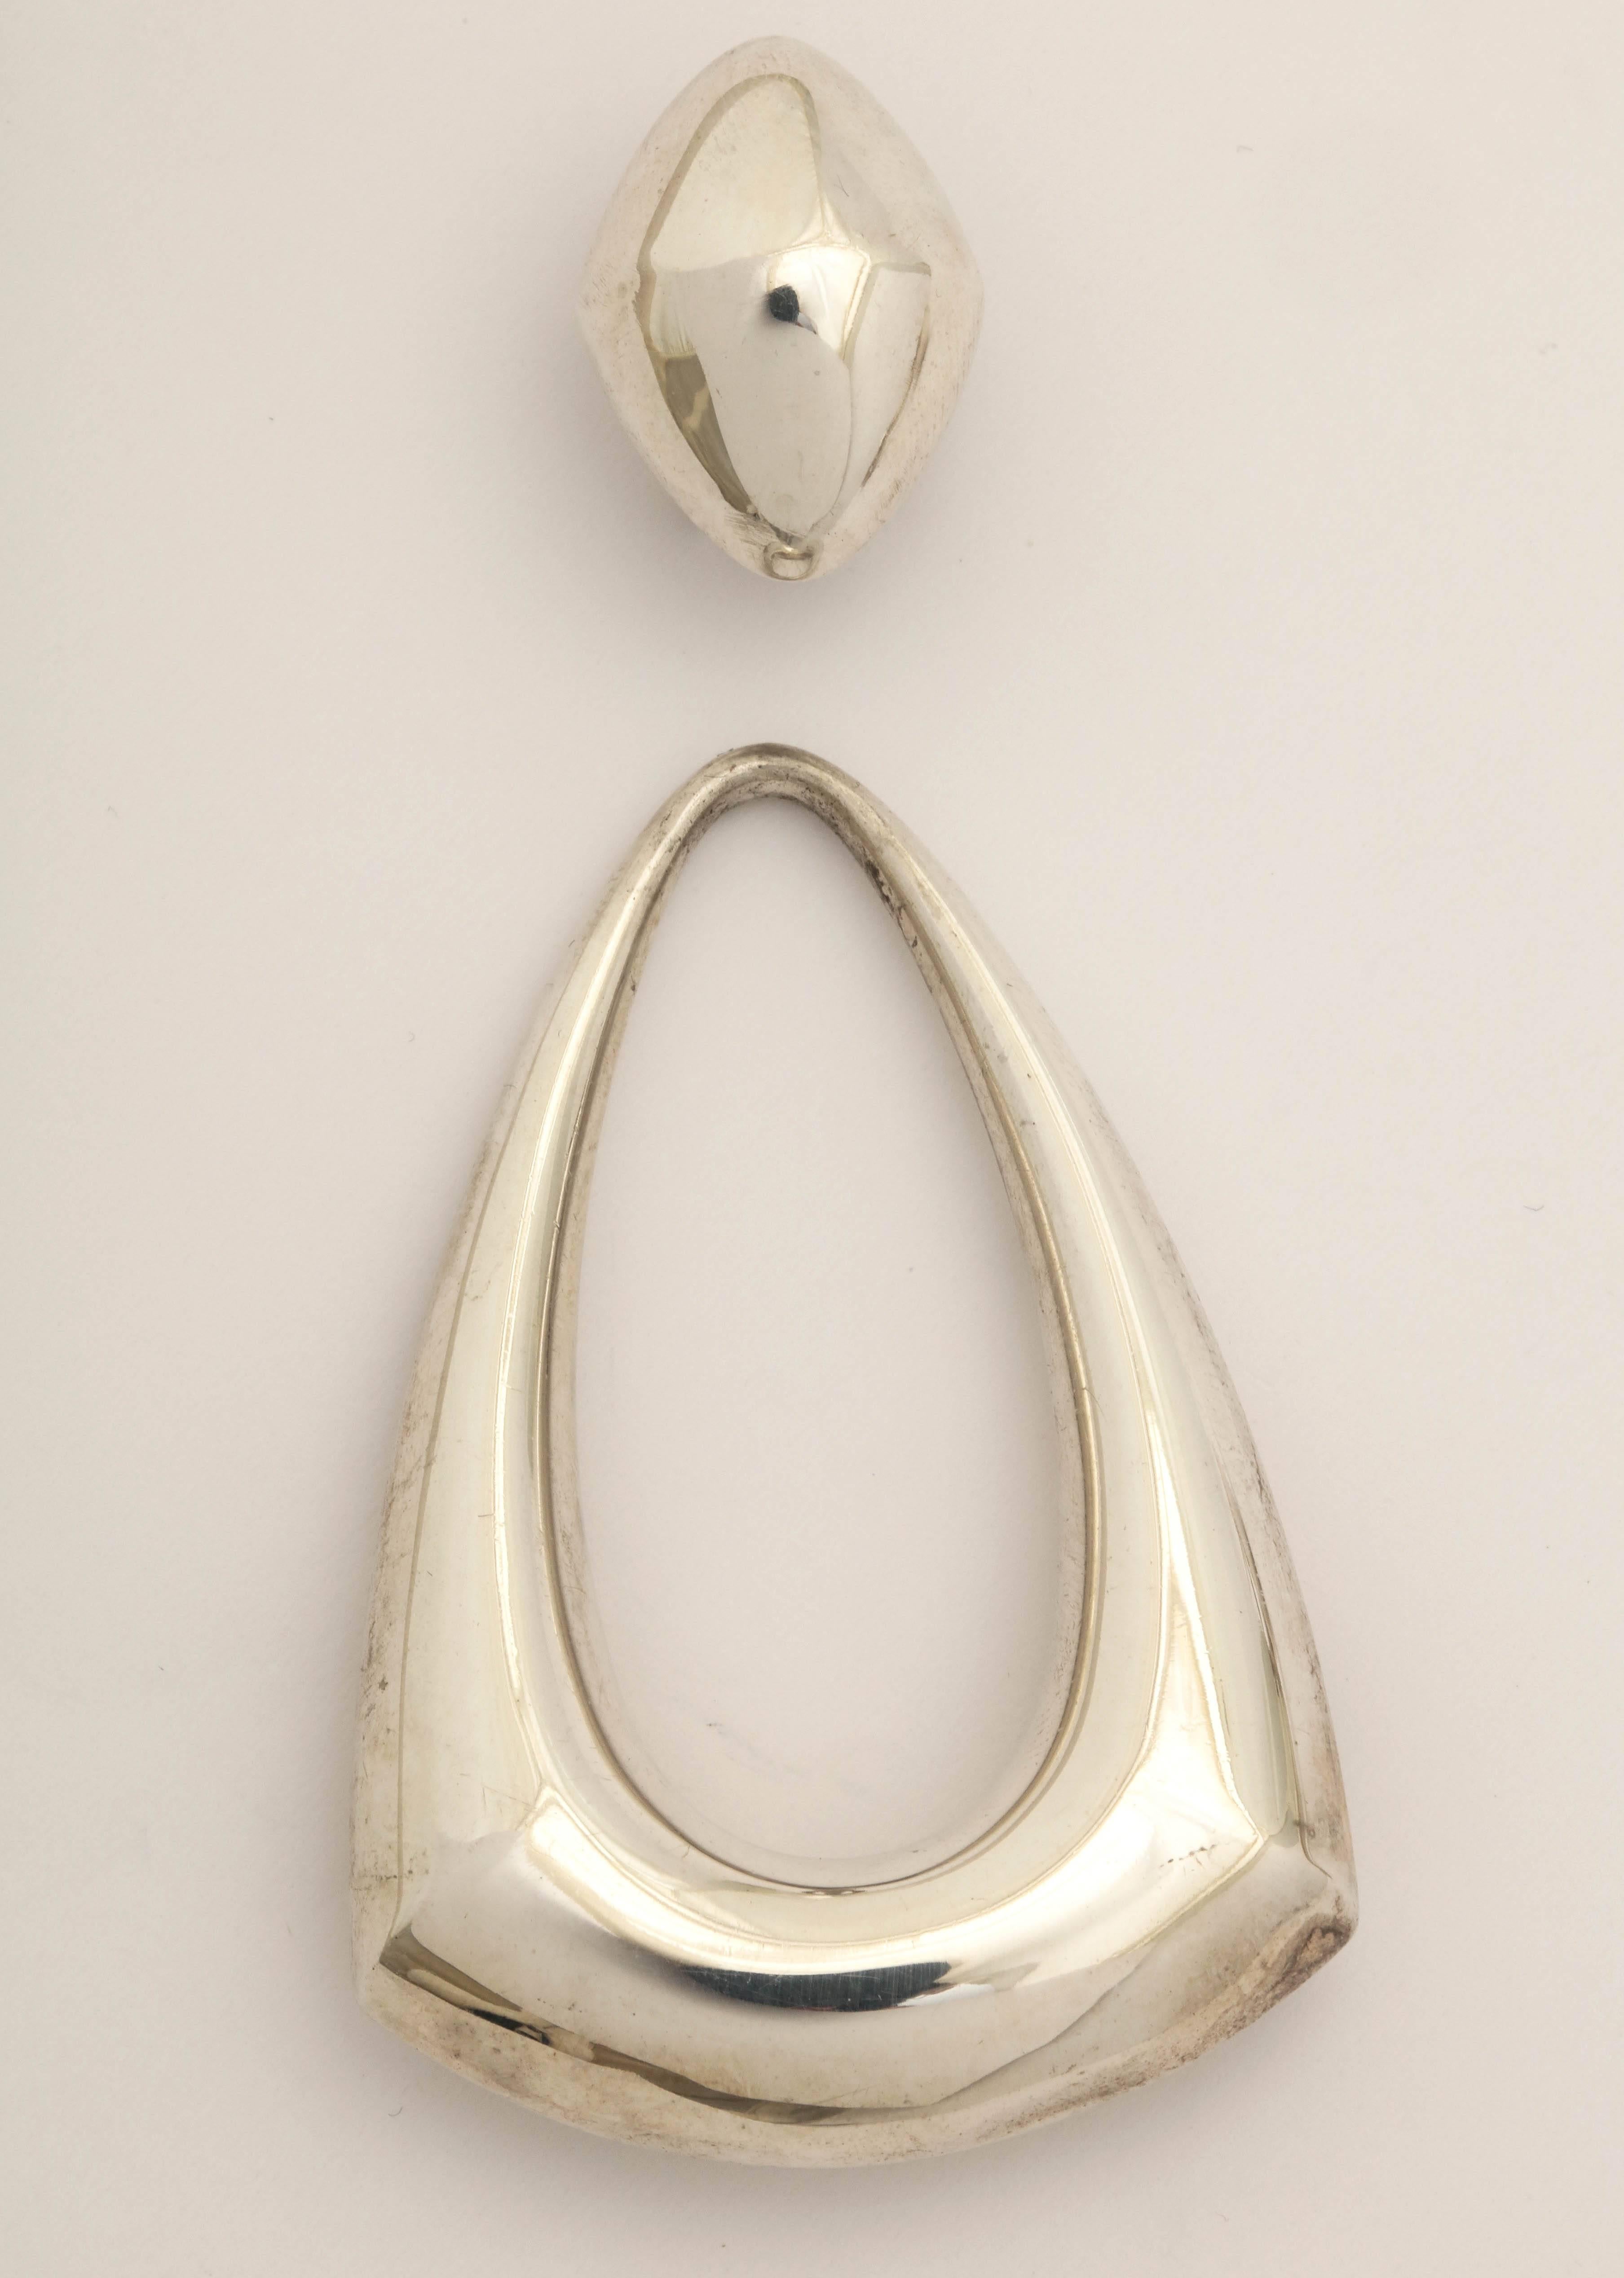 1980s Sterling Silver Detachable Large Doornocker Hanging Earrings with Posts 2